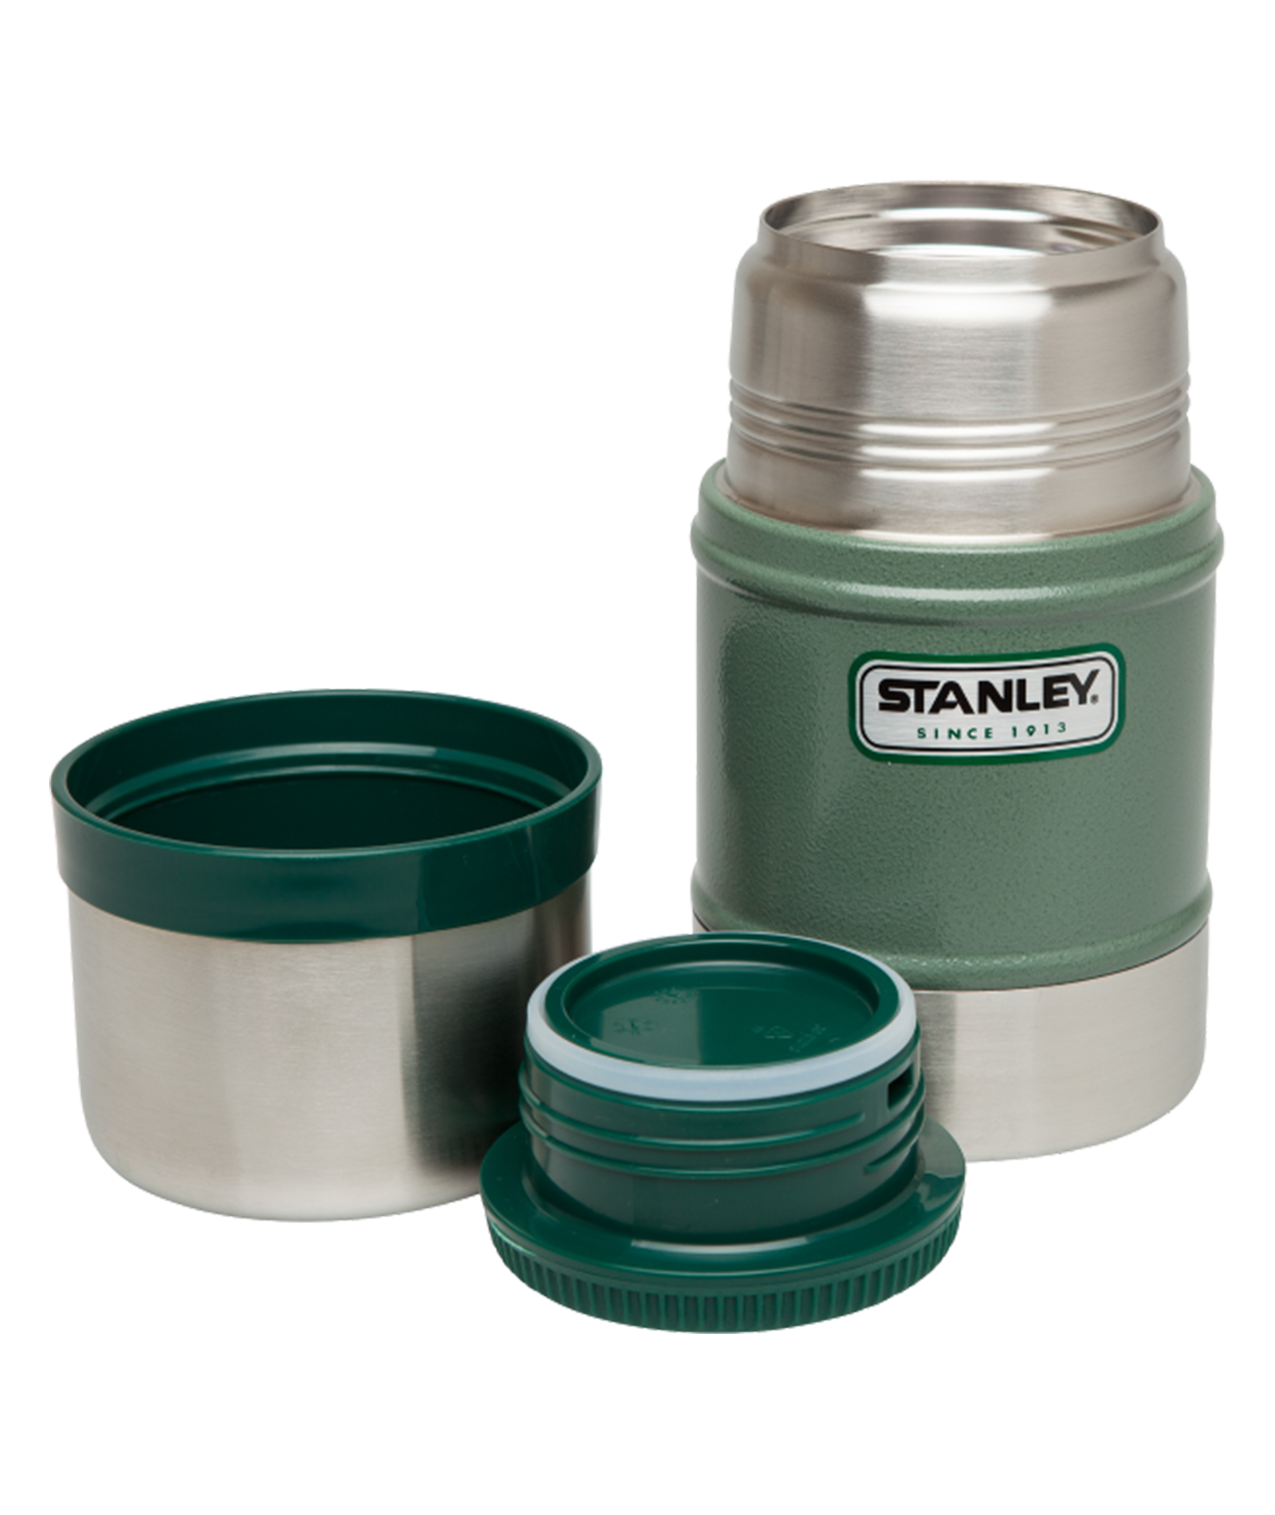 Stanley® food thermos with spoon / fork 400 ml